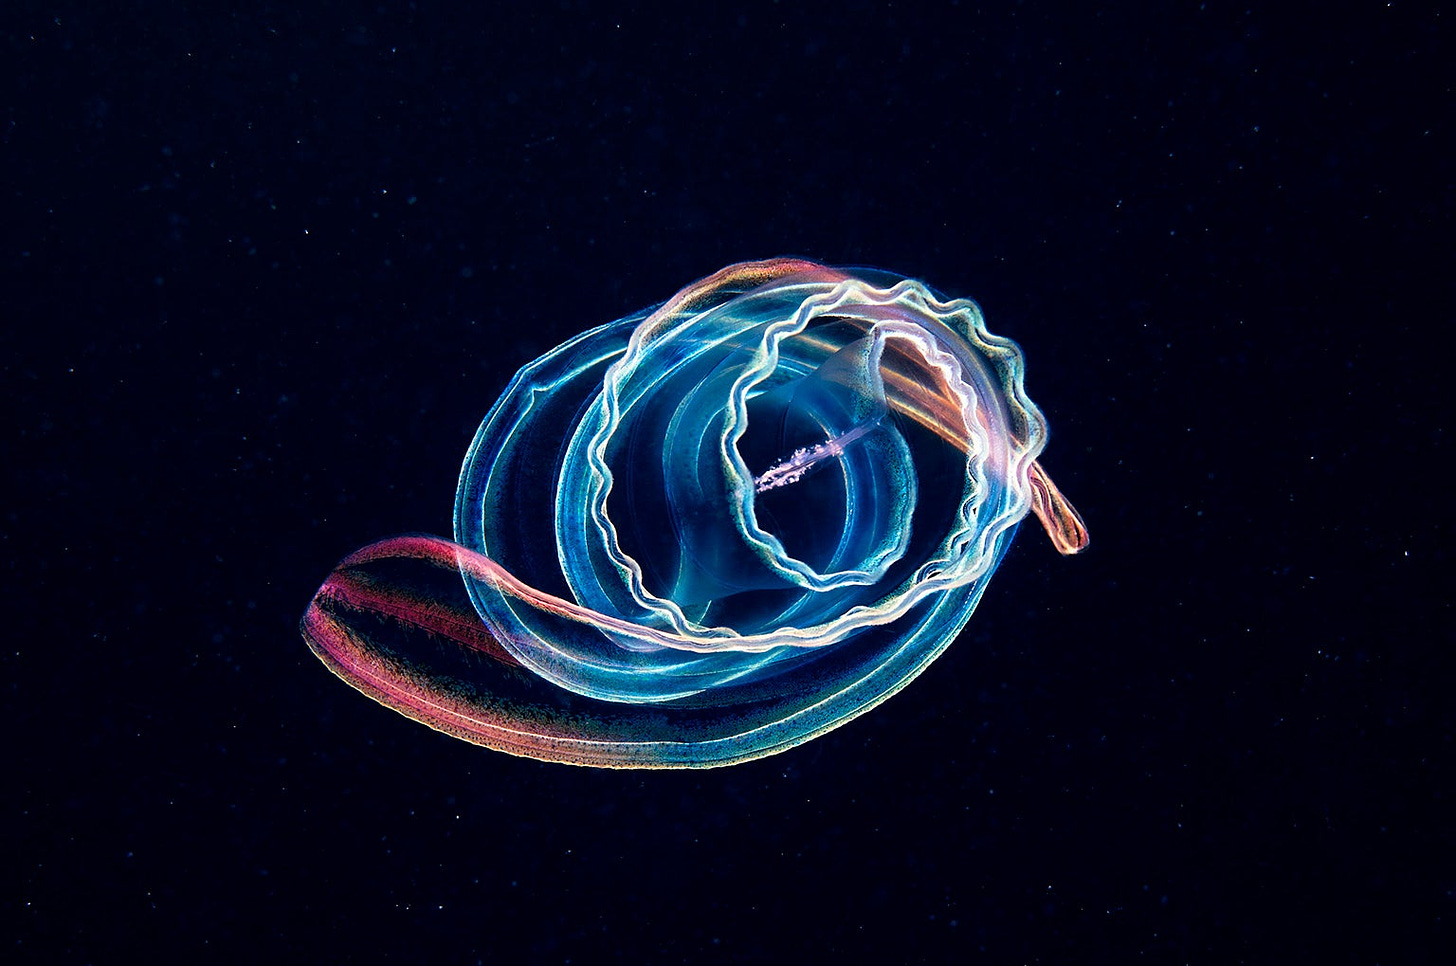 Venus's girdle, a species of comb jelly, or ctenophore.